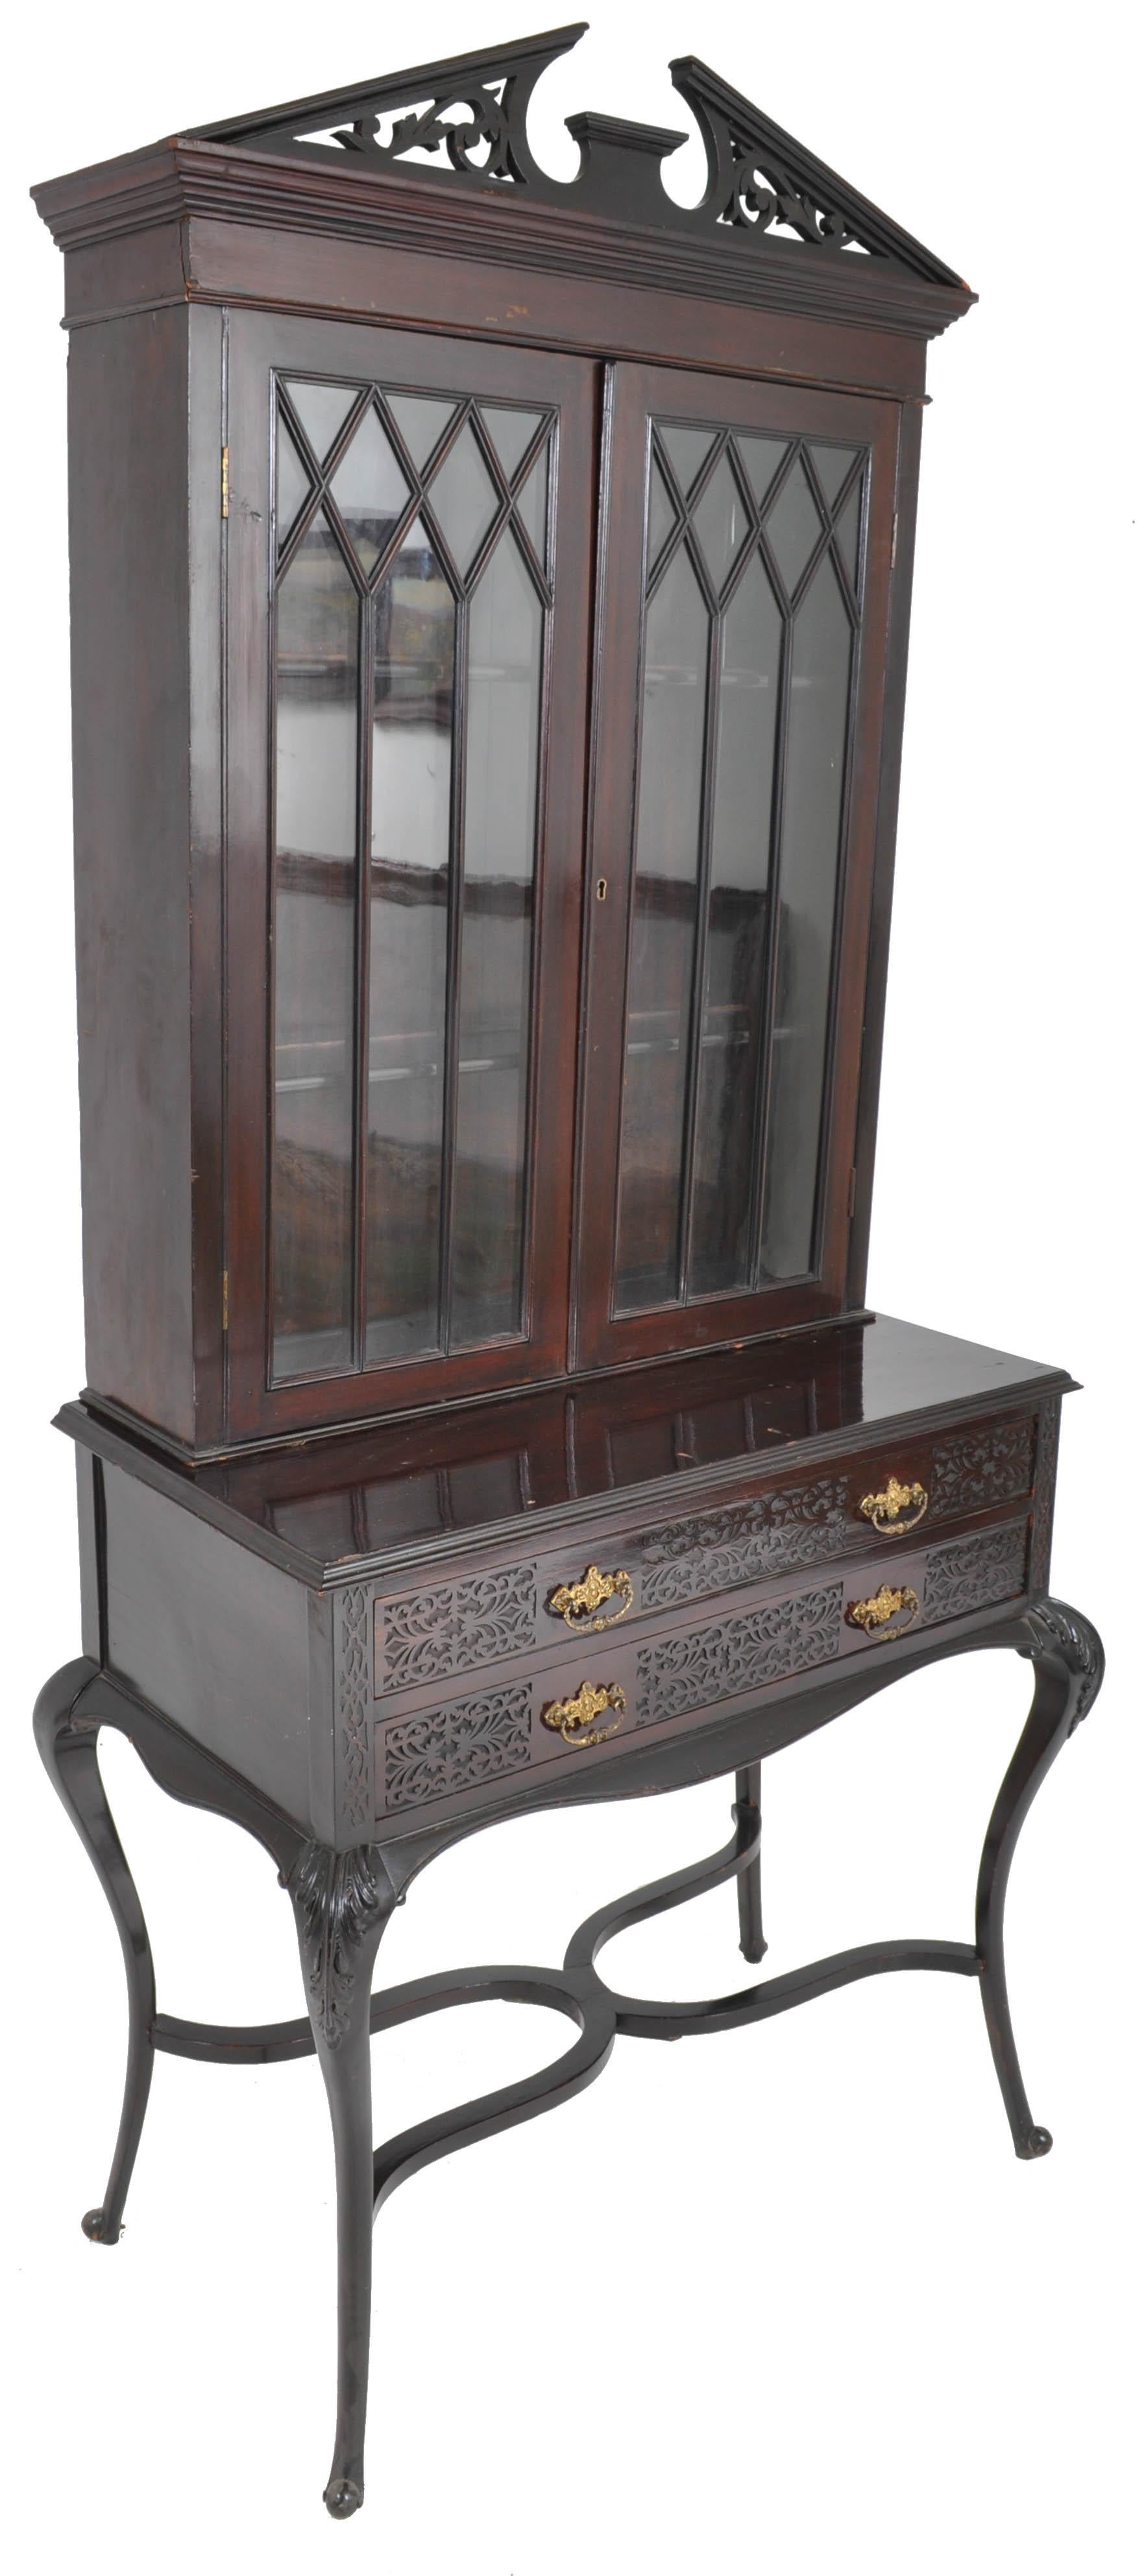 Antique English ebonized empire style cabinet / hutch / bookcase circa 1870. The cabinet is in three sections including a cornice of pierced architectural form, below a pair of doors with stylized Gothic glazing. The base having two drawers with